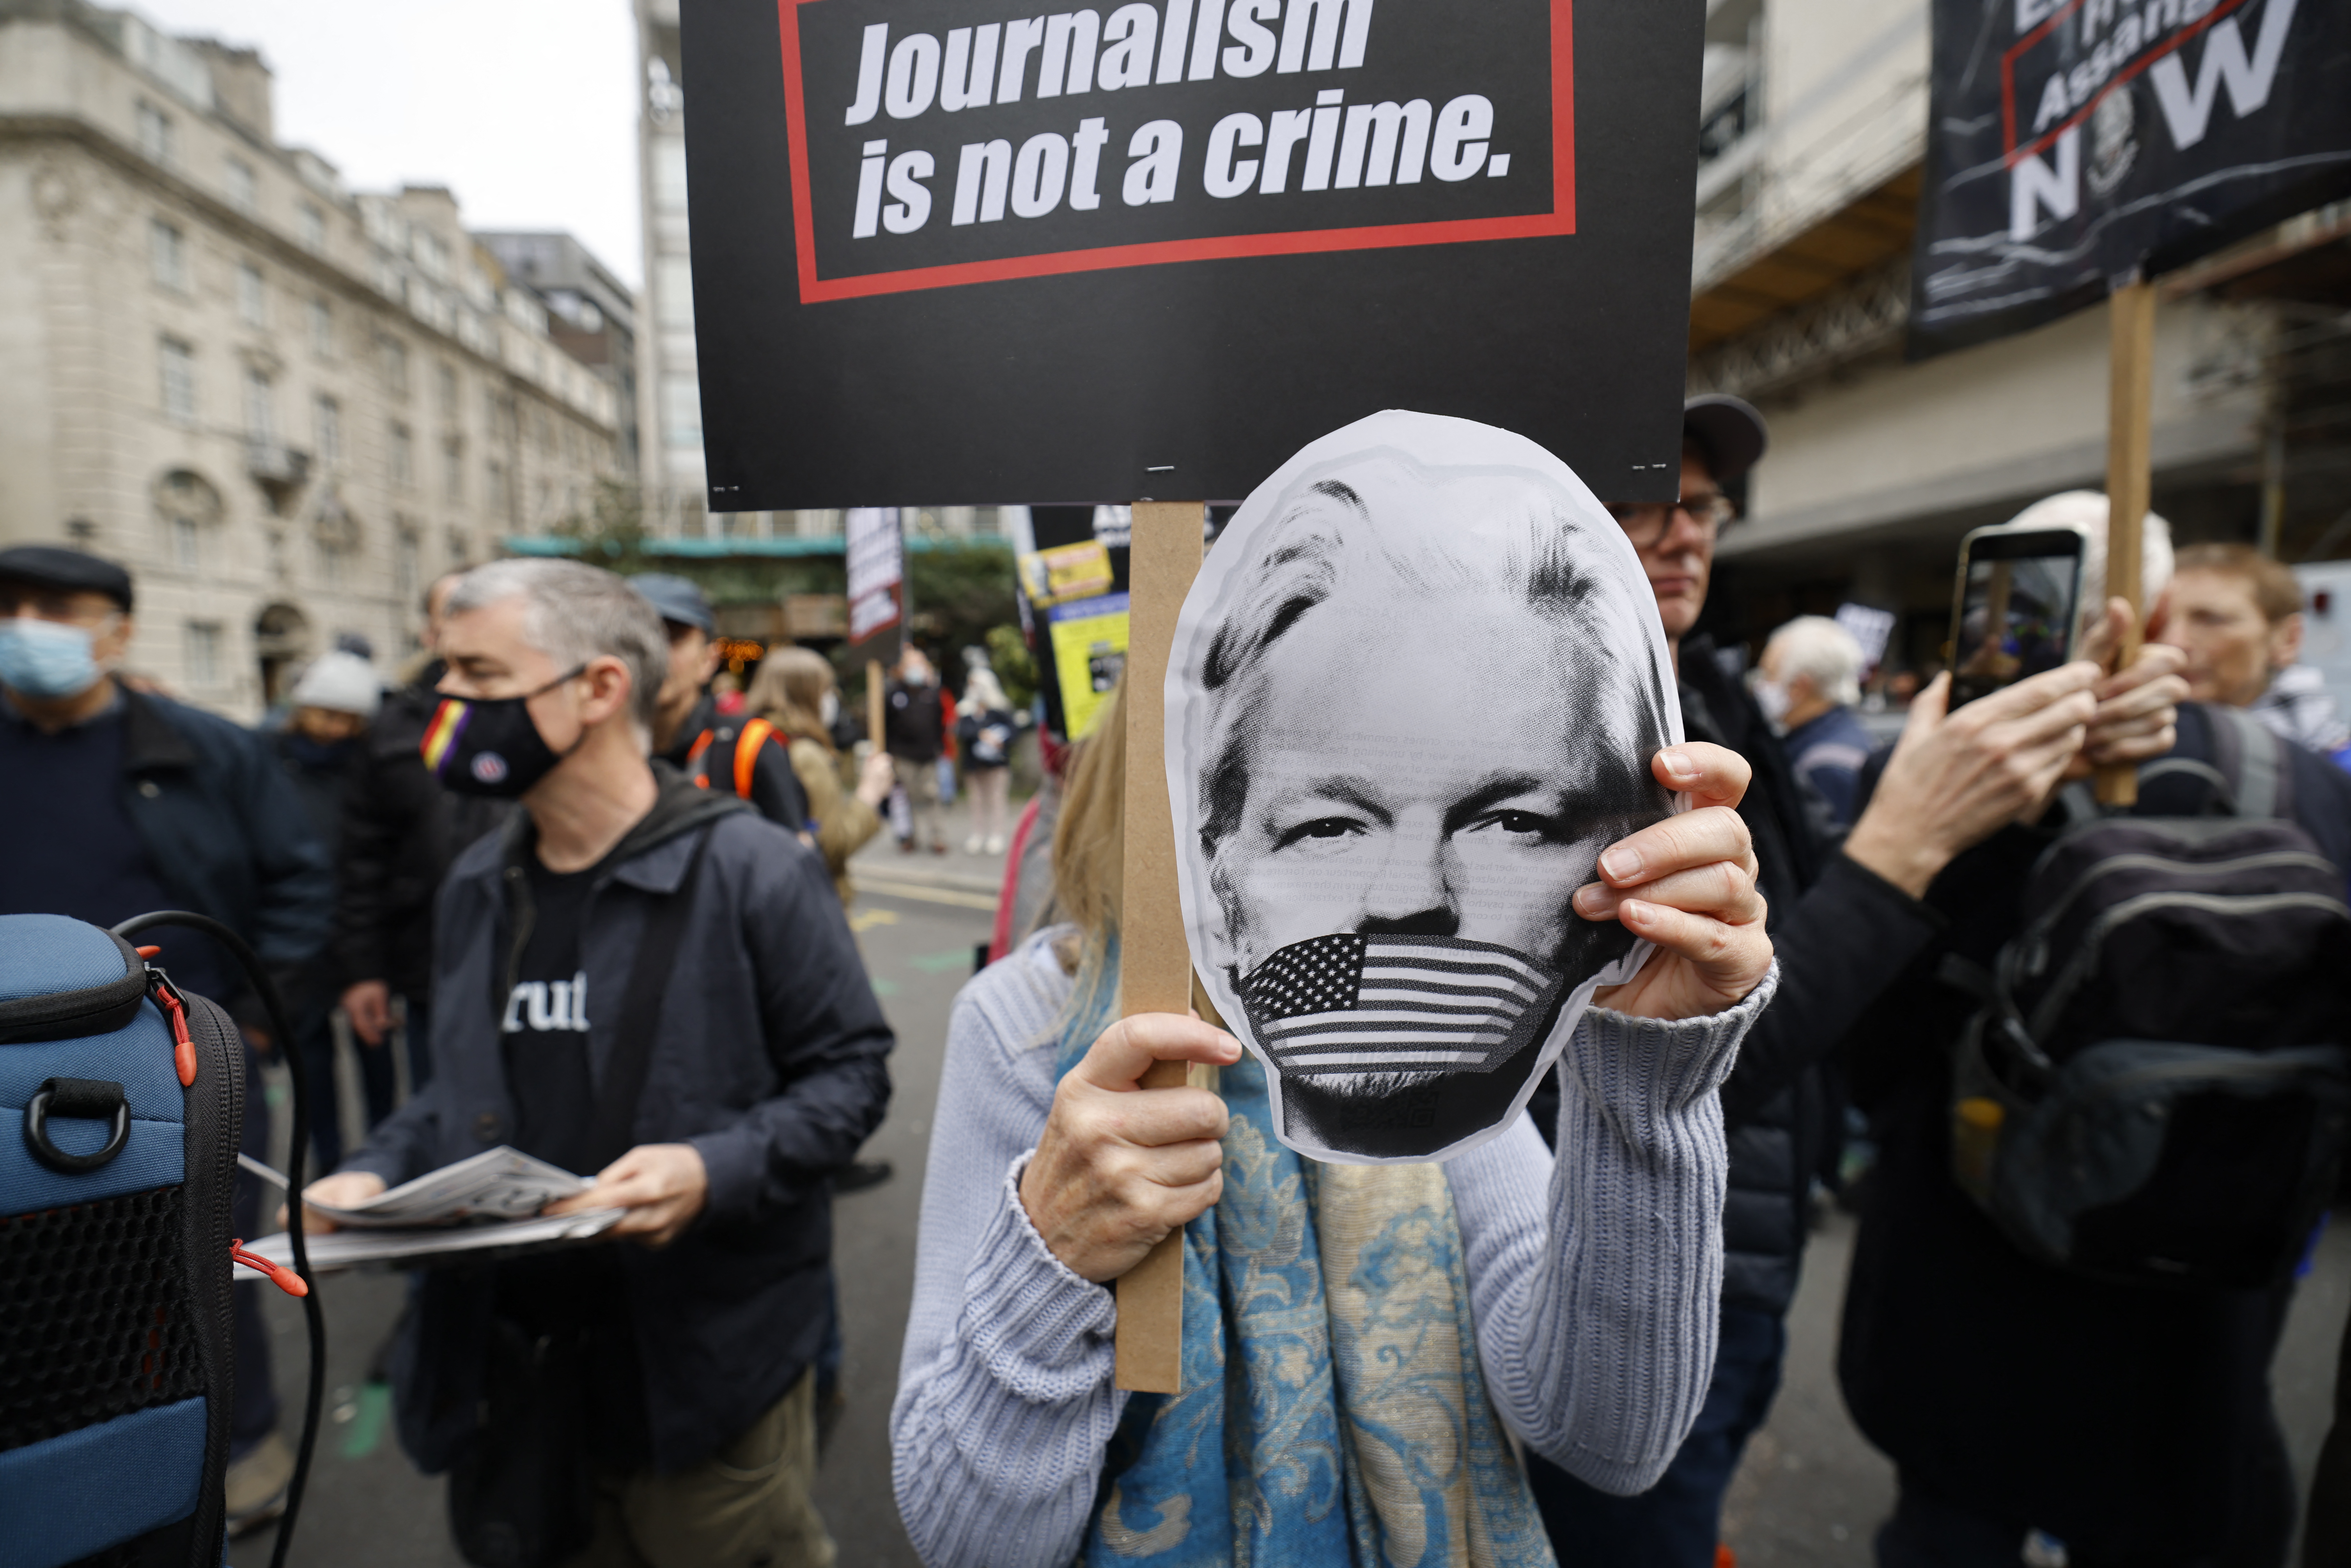 UK High Court set to hear US appeal in the Assange extradition case